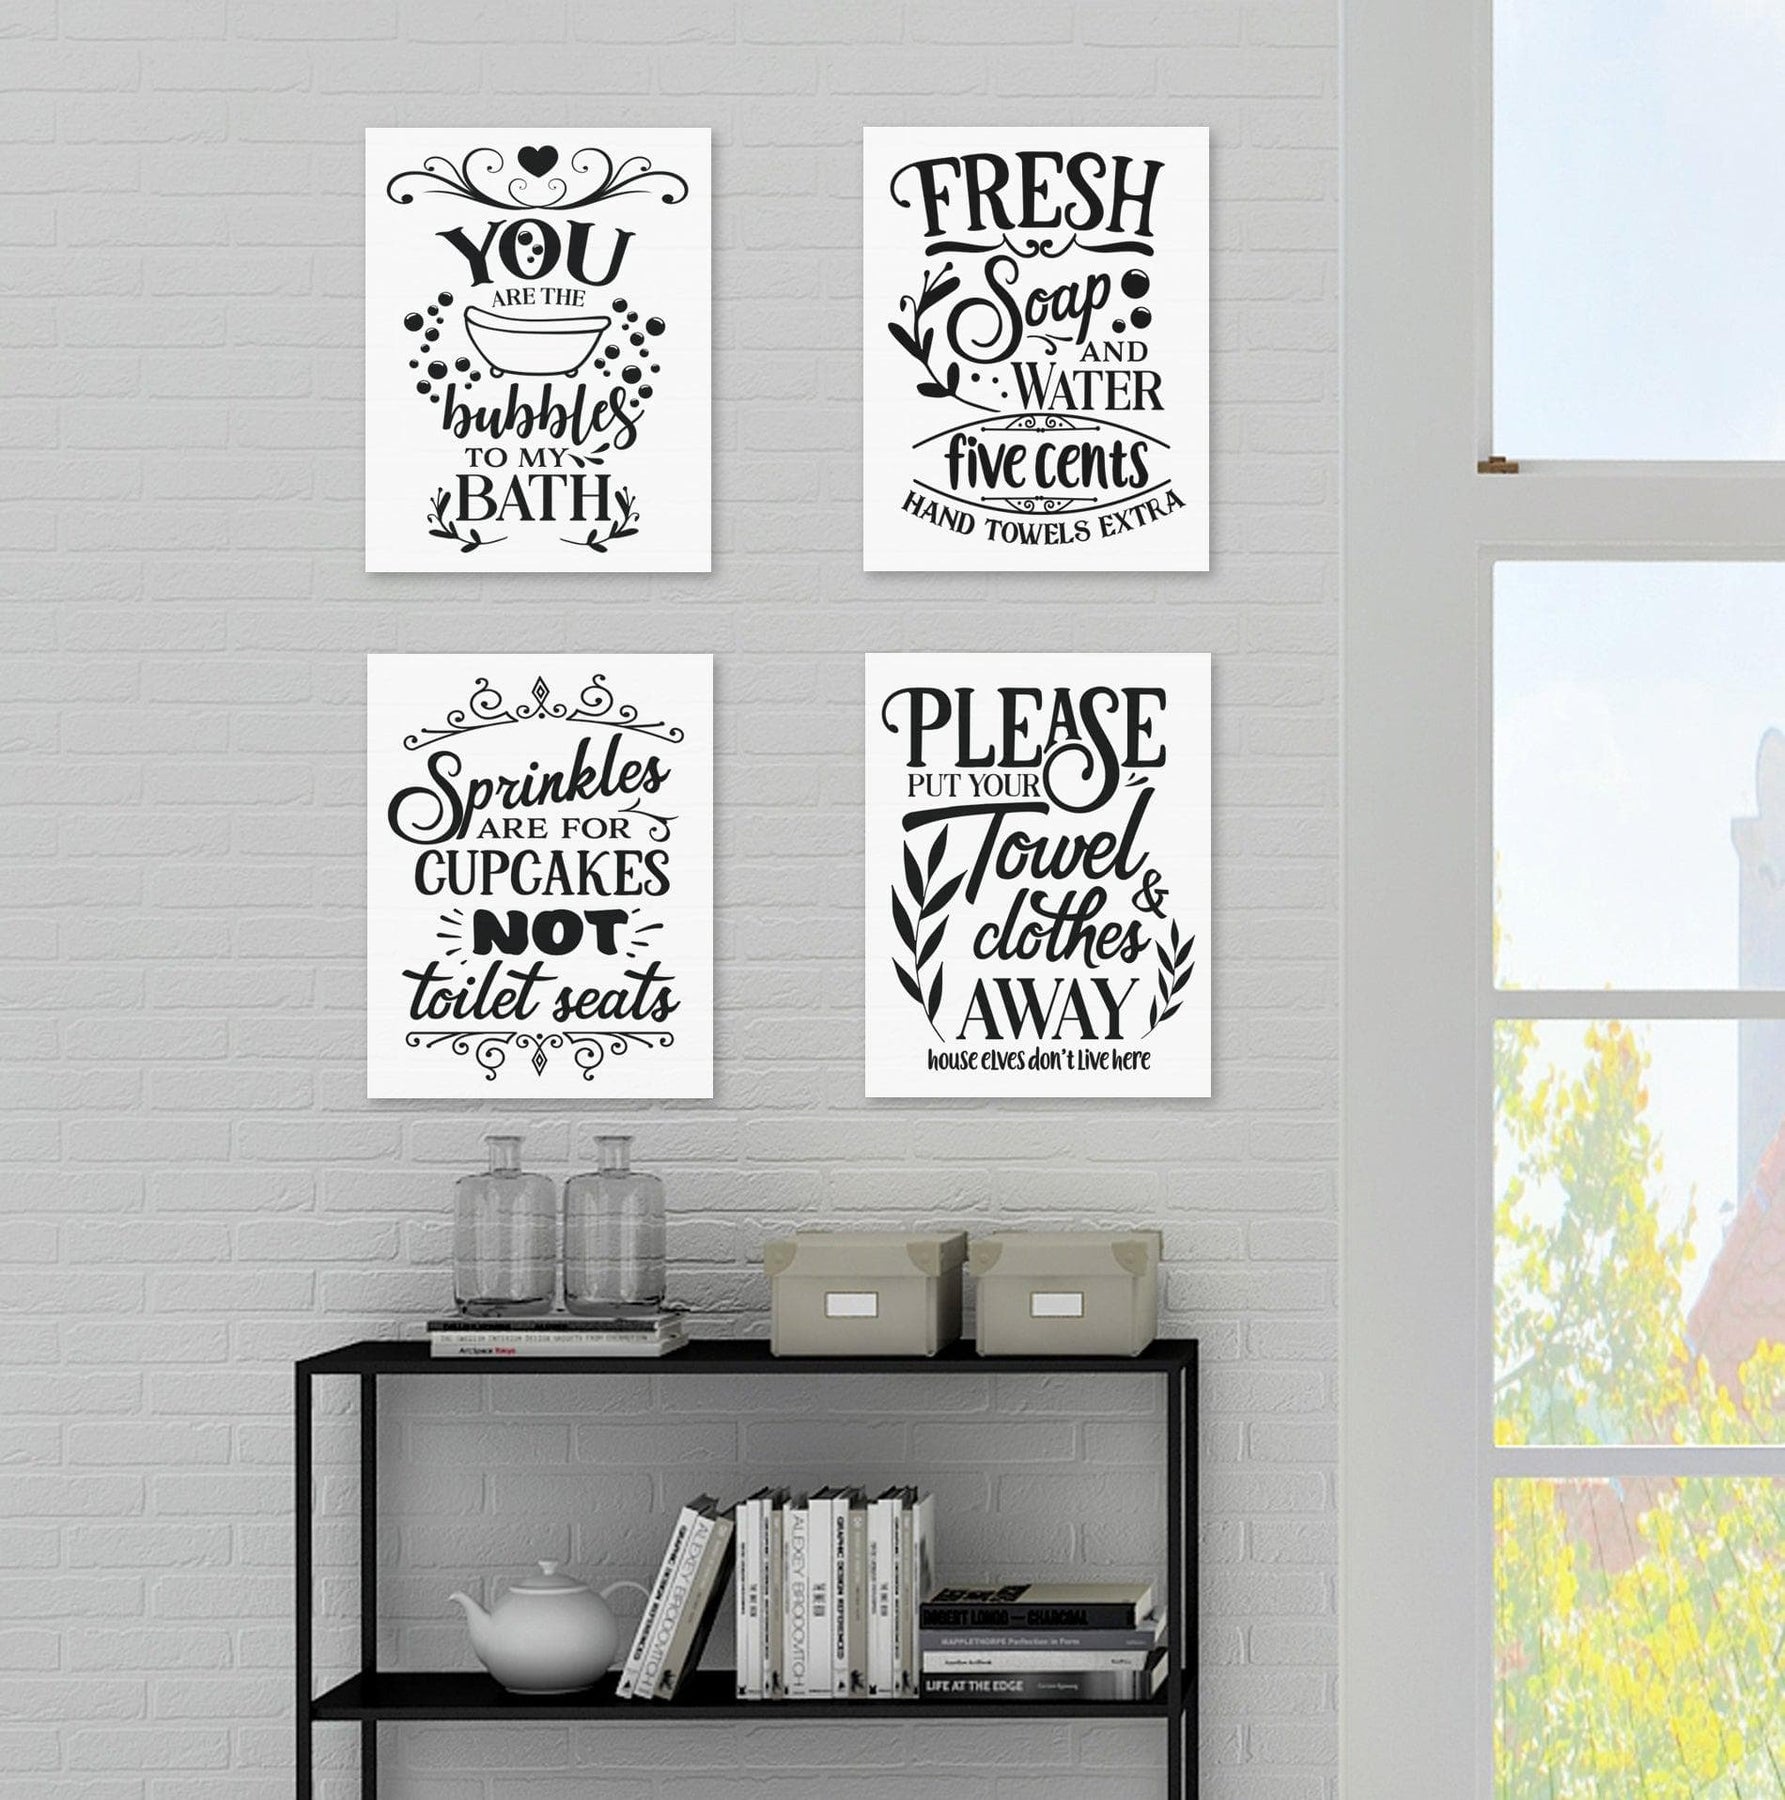 Funny Bathroom Quotes For Walls - Image to u